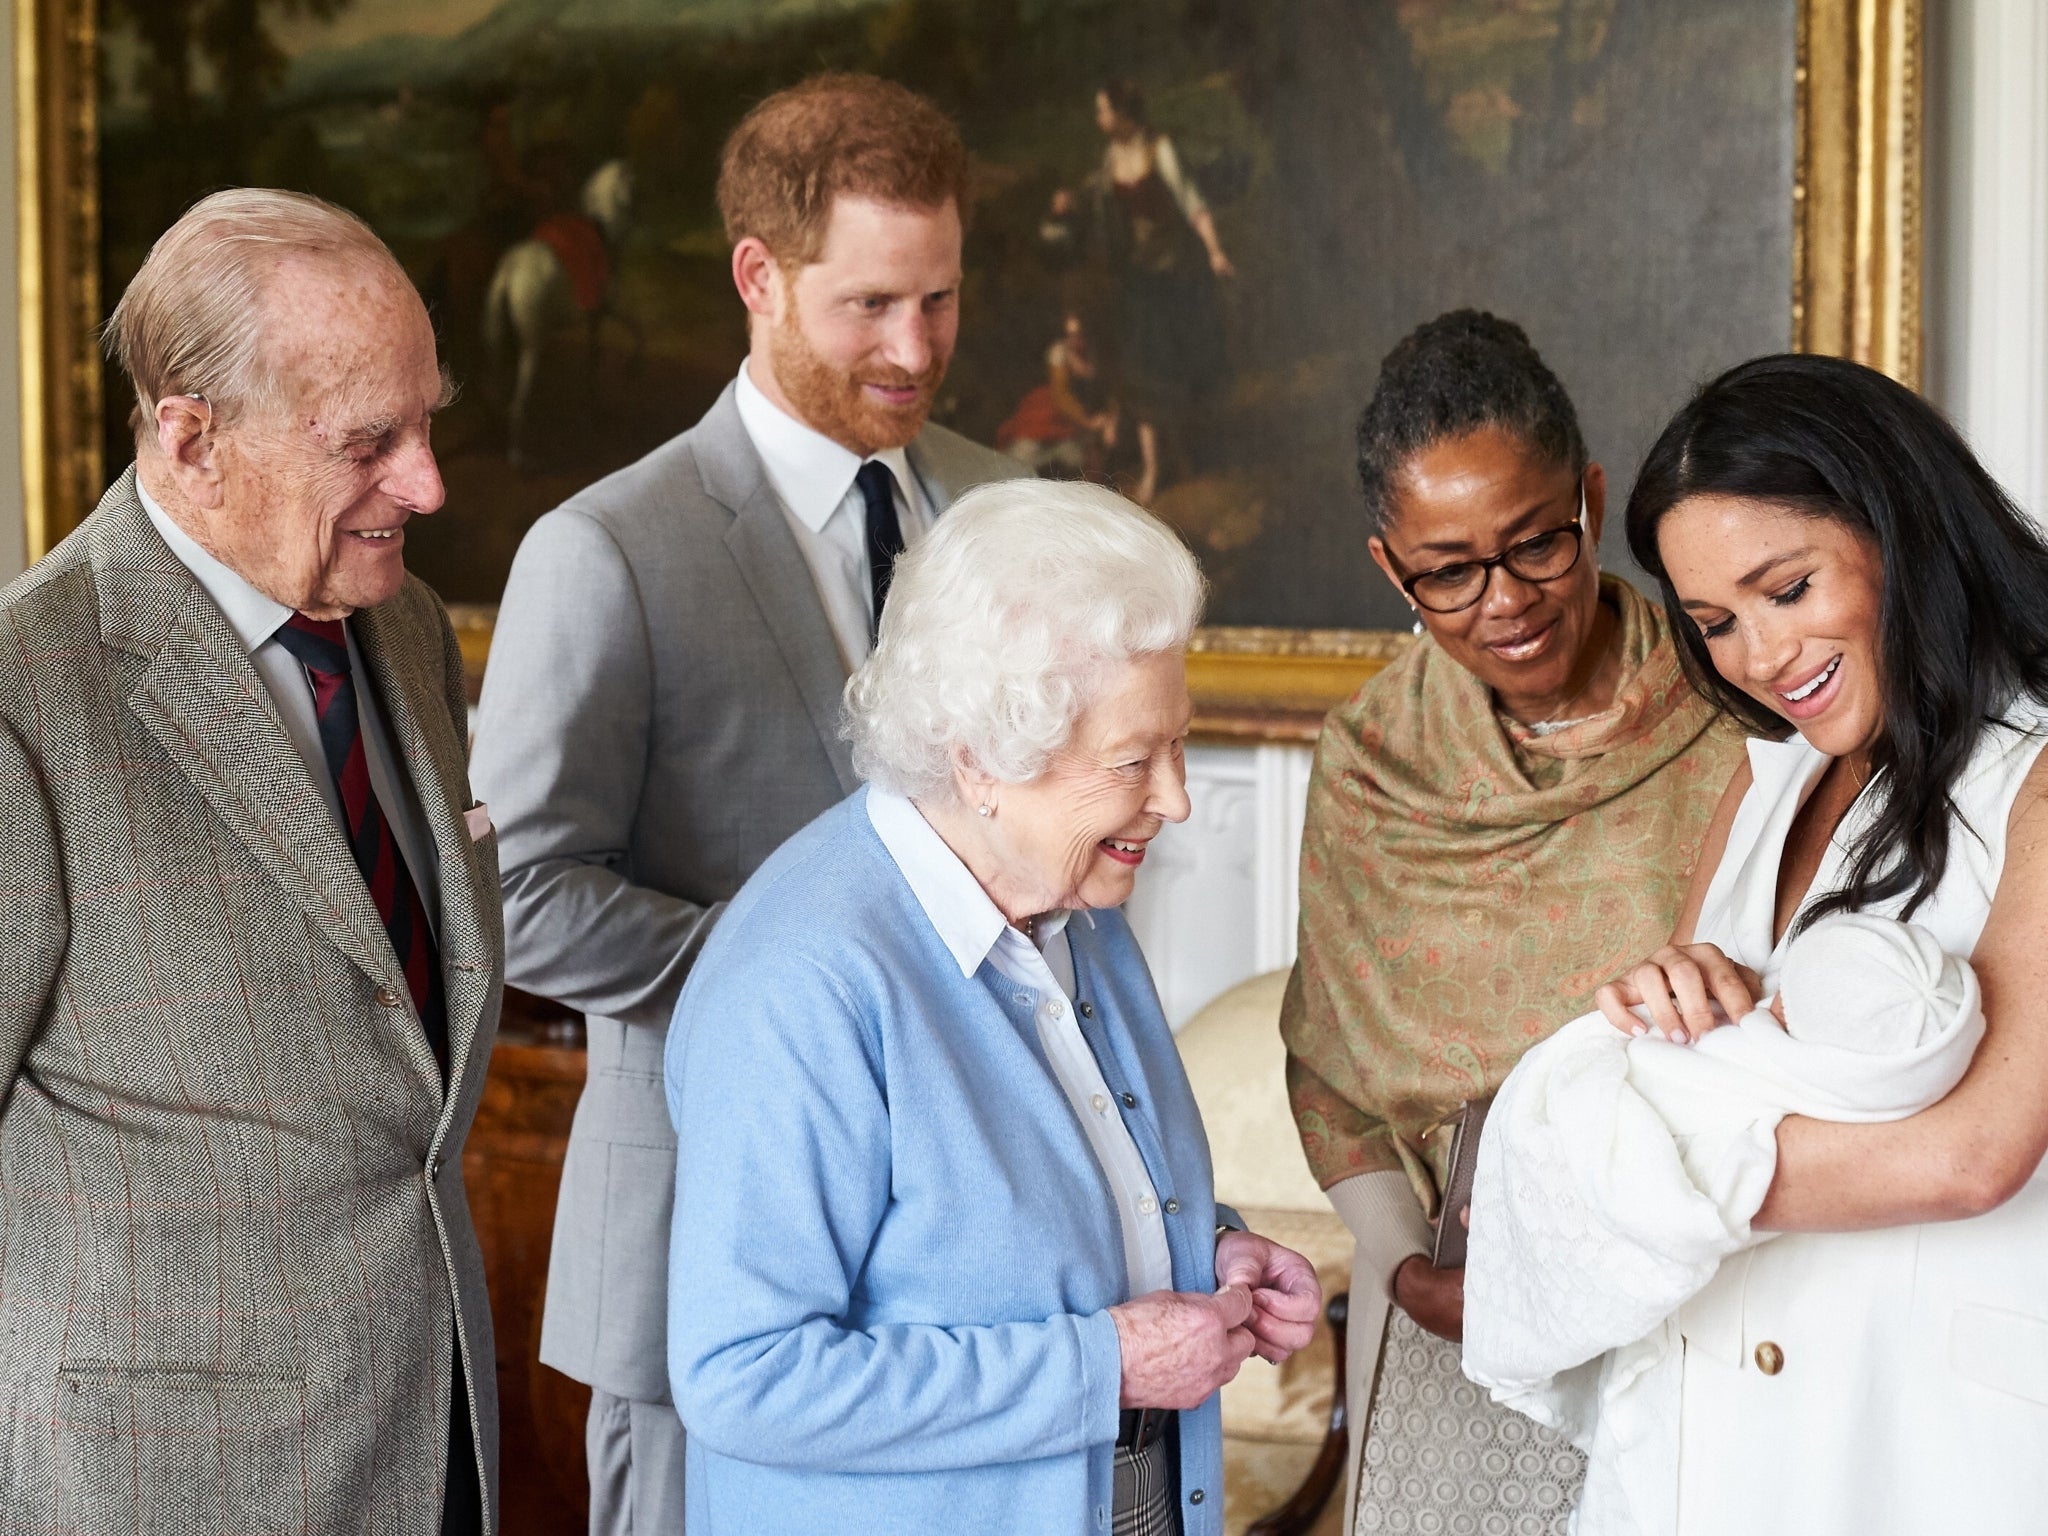 (L-R) Prince Philip, Prince Harry, the Queen, Doria Ragland and Meghan Markle with baby Archie in 2019